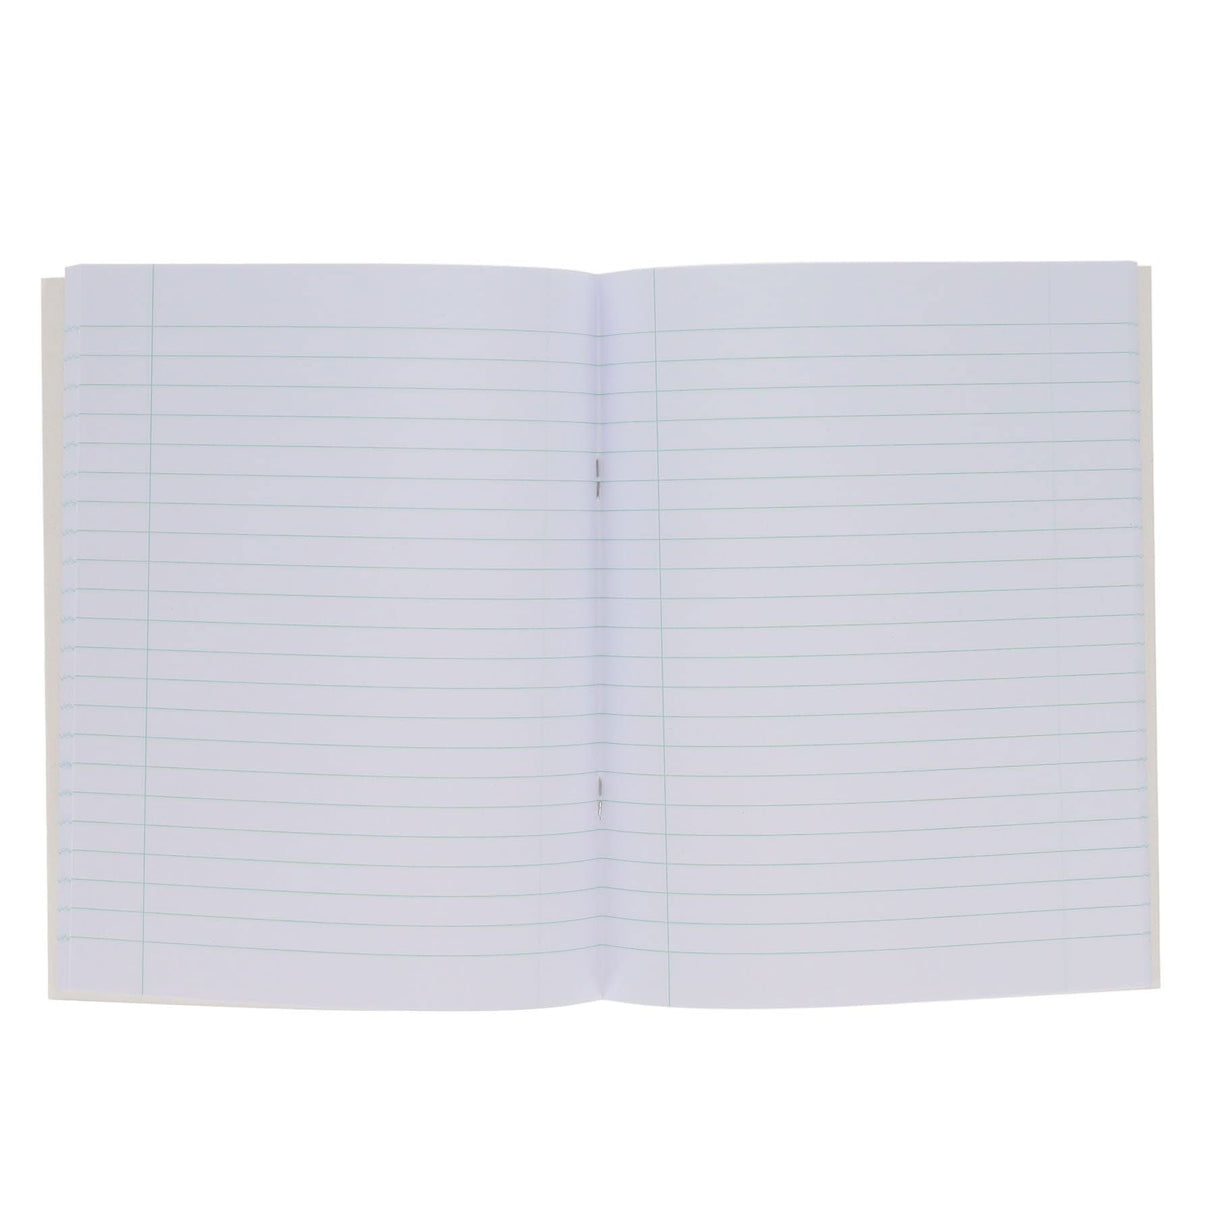 Ormond Multipack | A11 Exercise Book - Margin Ruled - 88 Pages - Pack of 10 | Stationery Shop UK